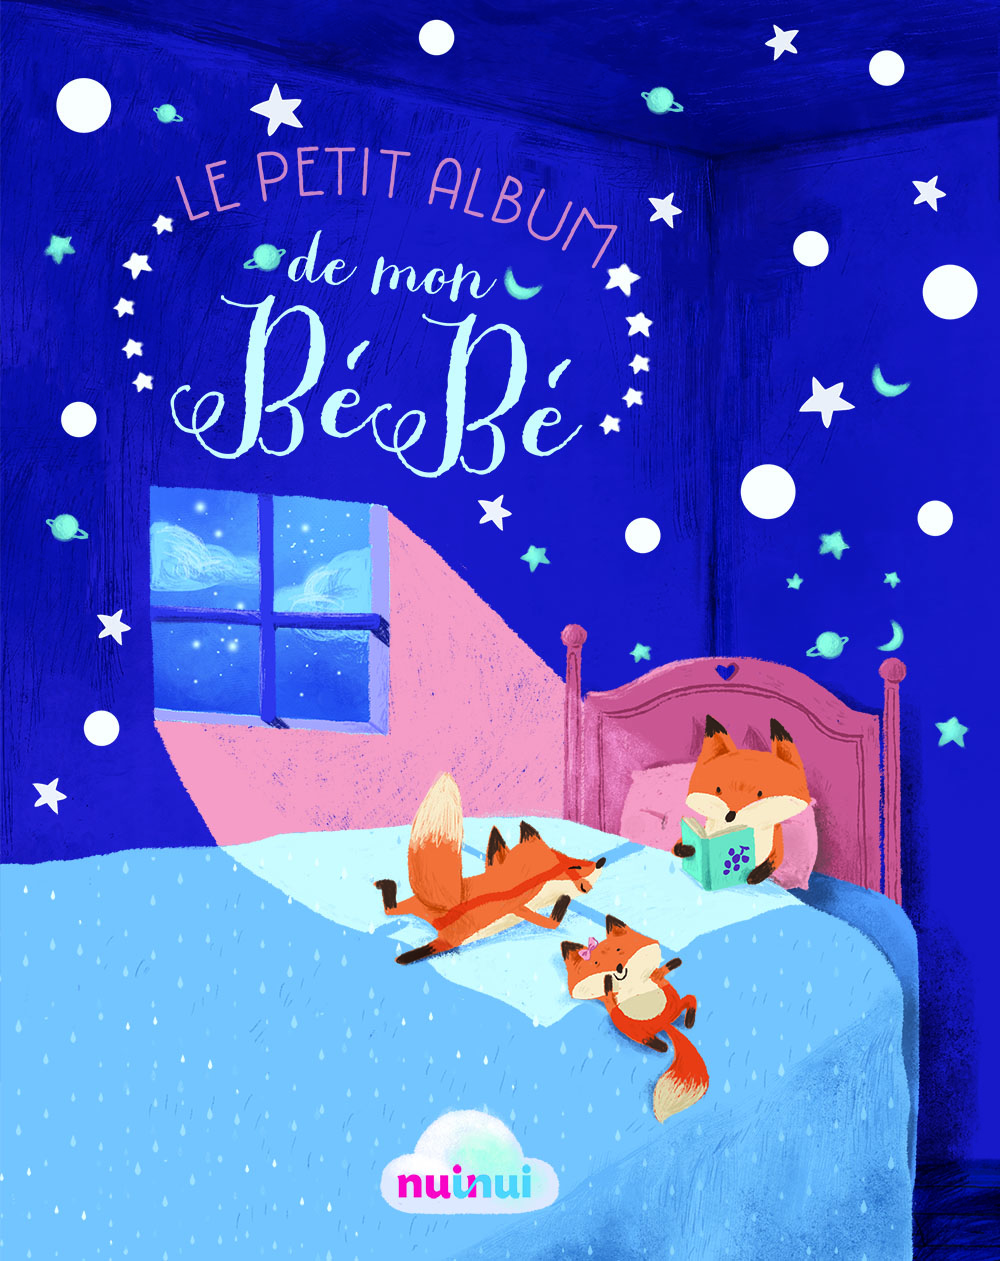 This is a scrapbook for parents to keep all the memories of their children growing up, with many fun suggestions. This album is published in English, Italian and French by Nuinui Publishers.